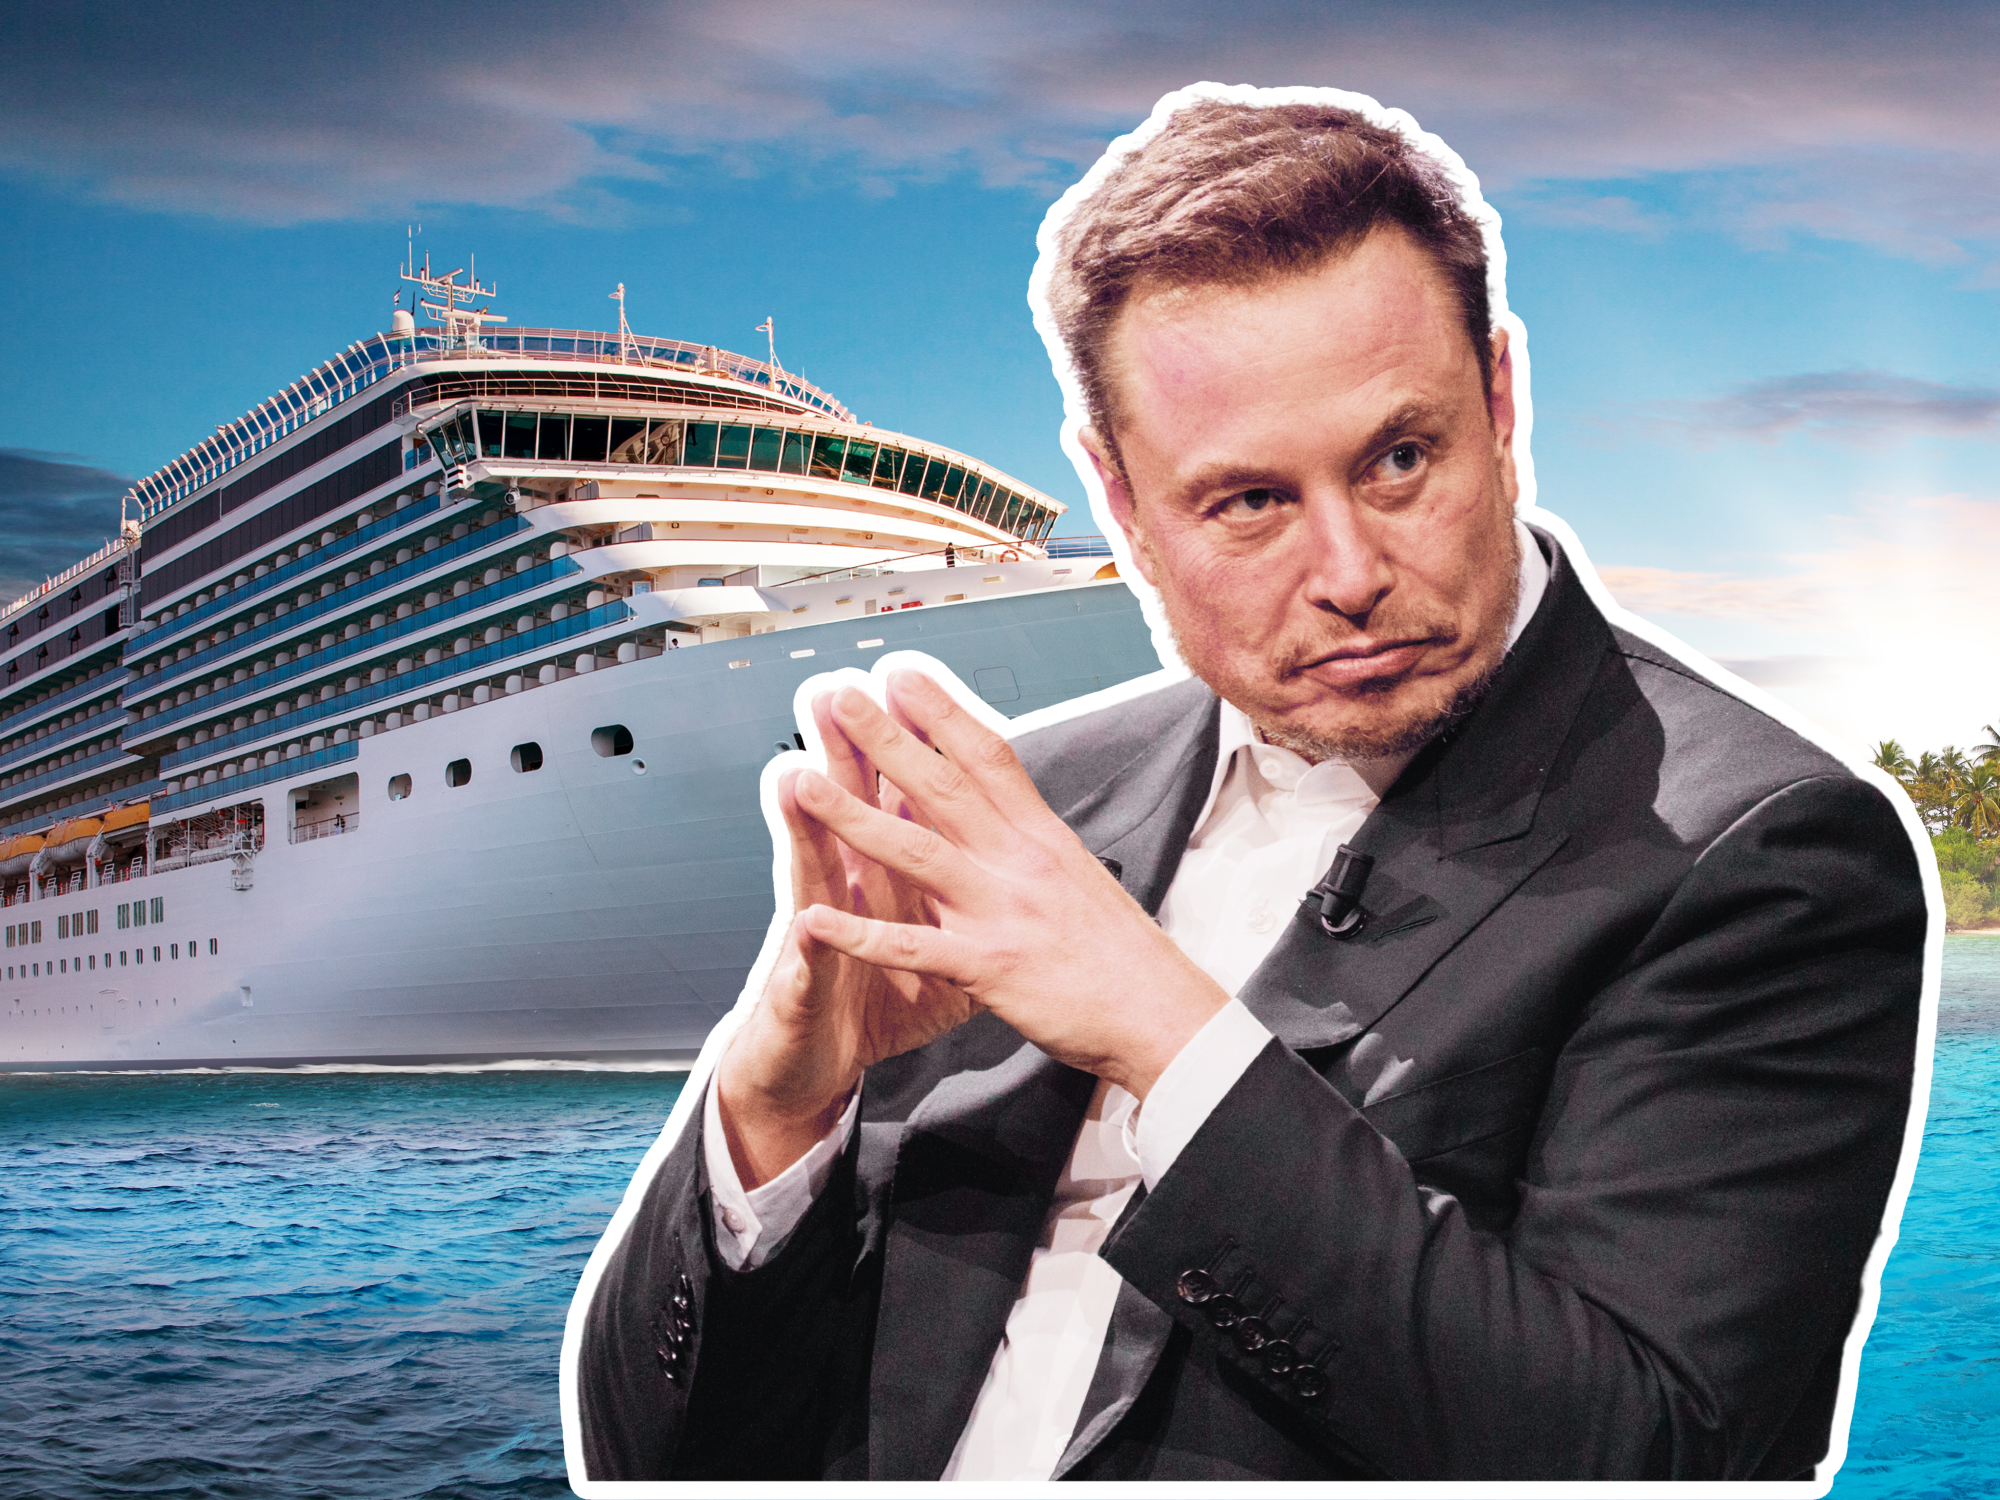 With Daily Tweet Limits, Elon Musk Turns Twitter Into a Nightmare Cruise Ship